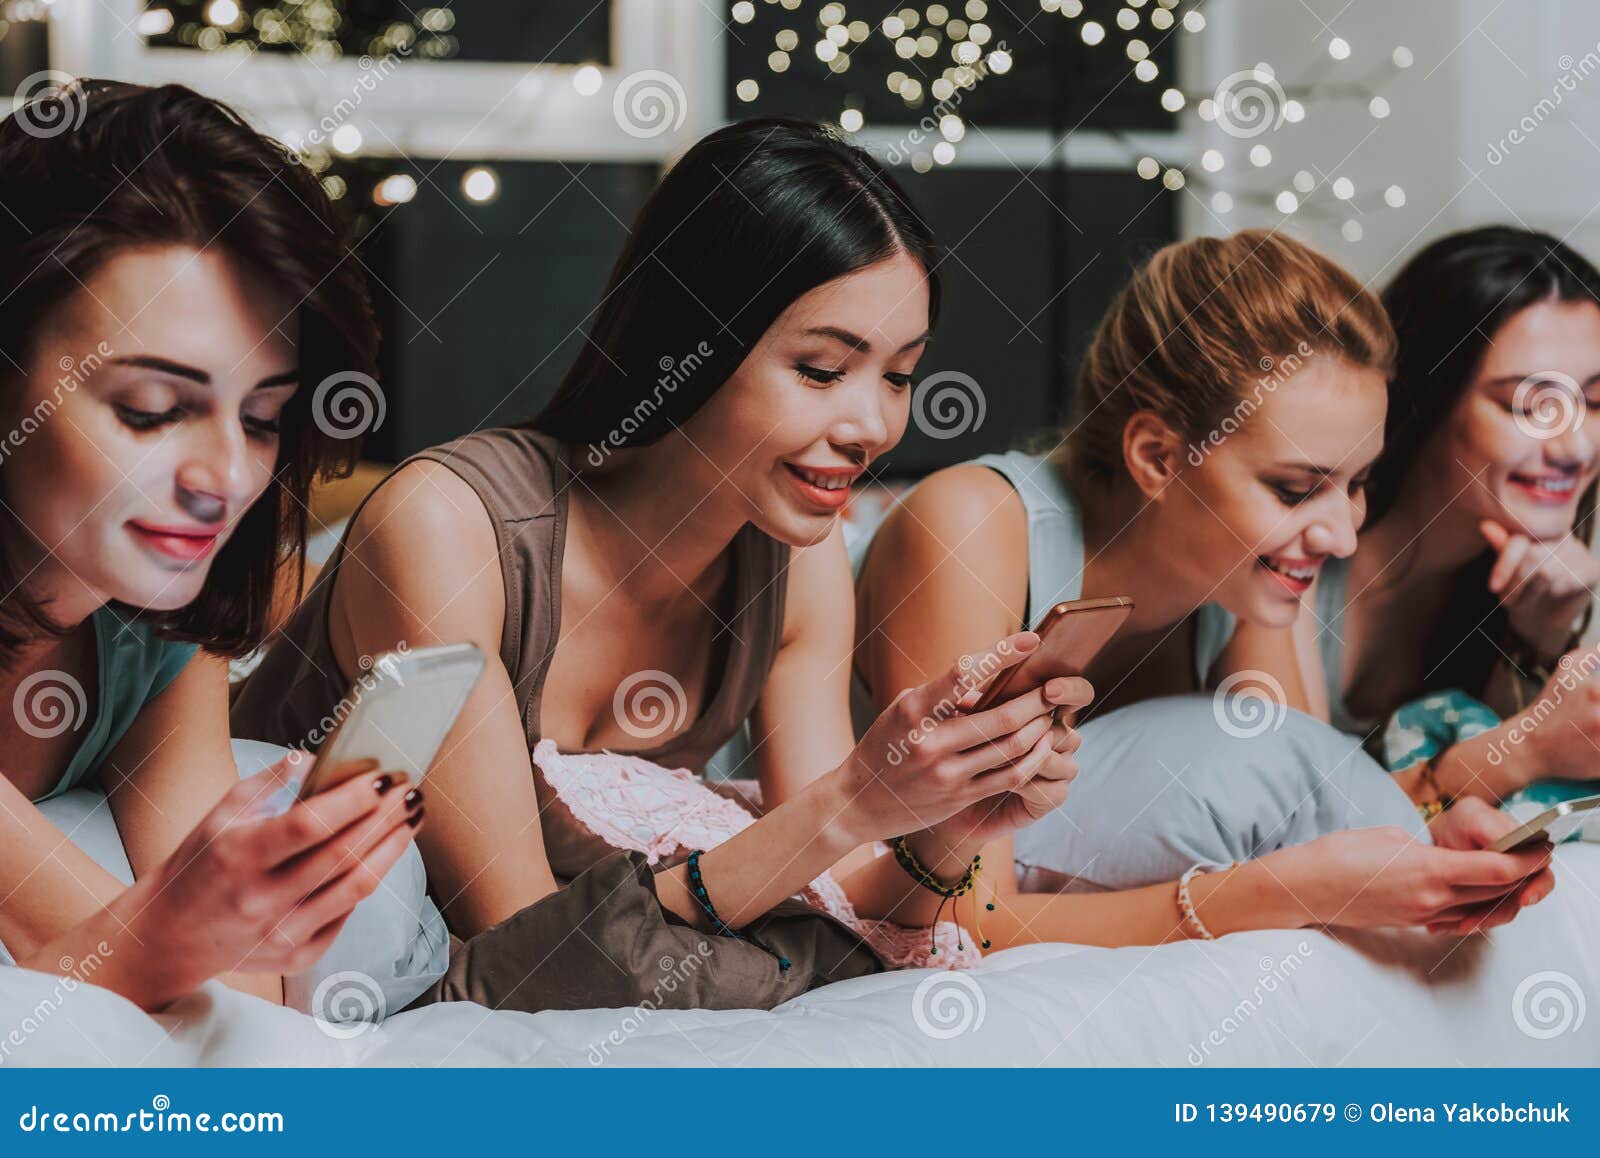 Young Women Watching At Cellphones In Room Stock Image Image Of Happy Conversation 139490679 